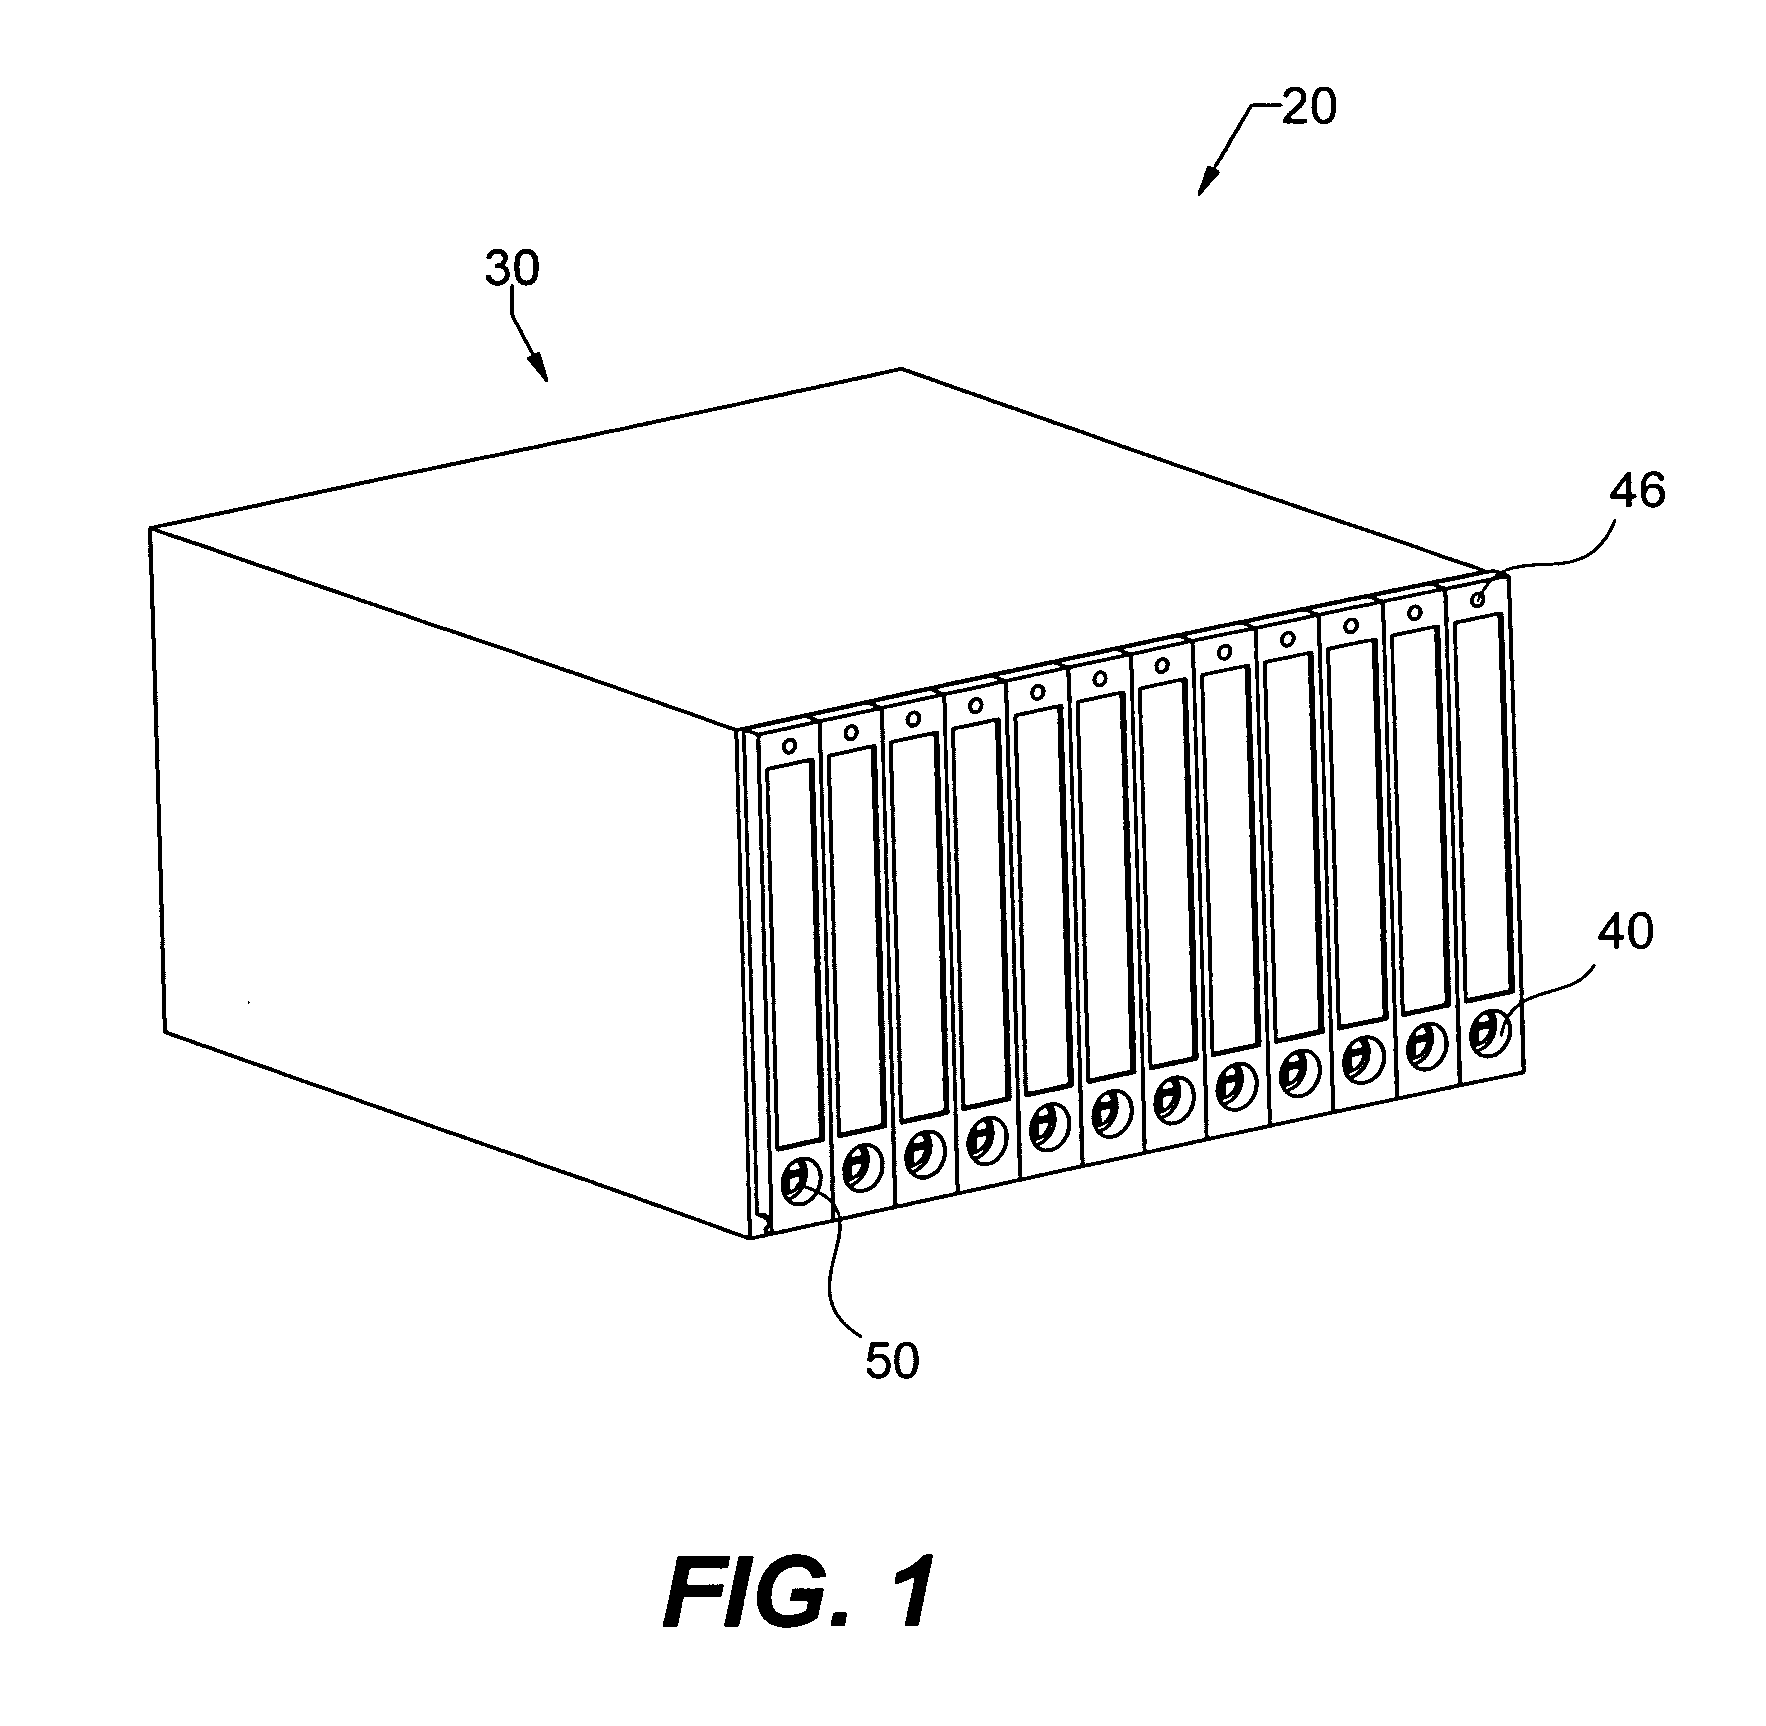 Multi-chamber spray cooling system